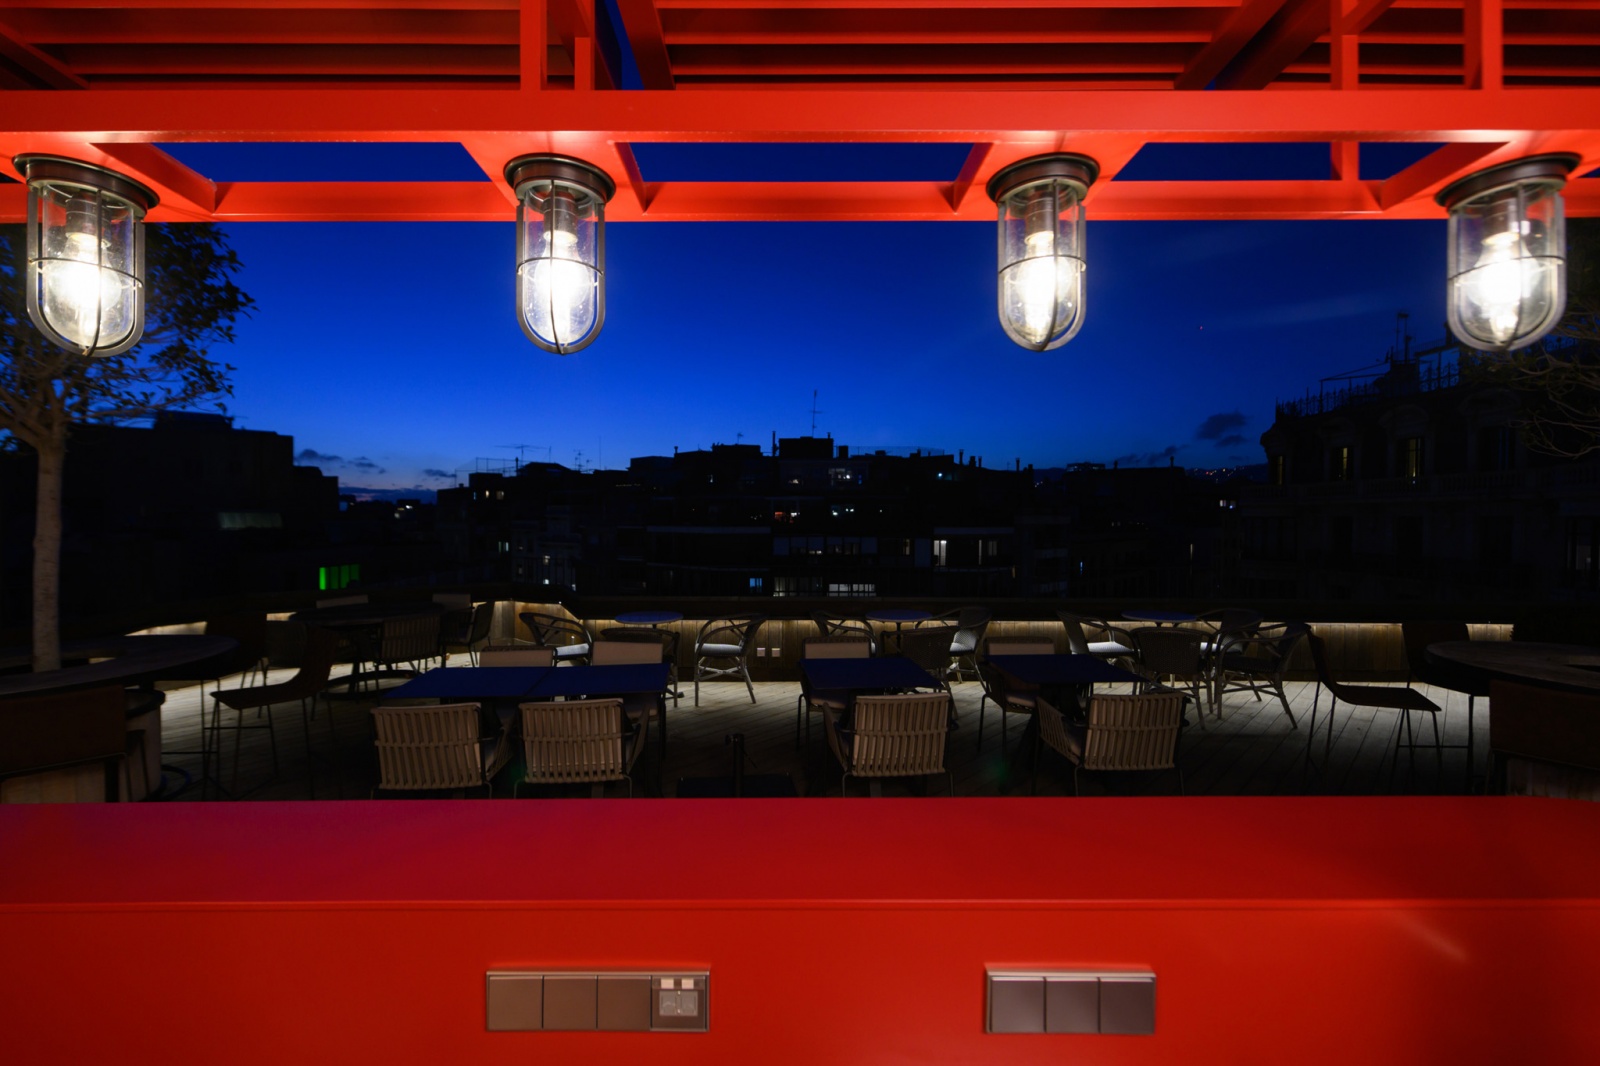 Bar on the roof with metal elements